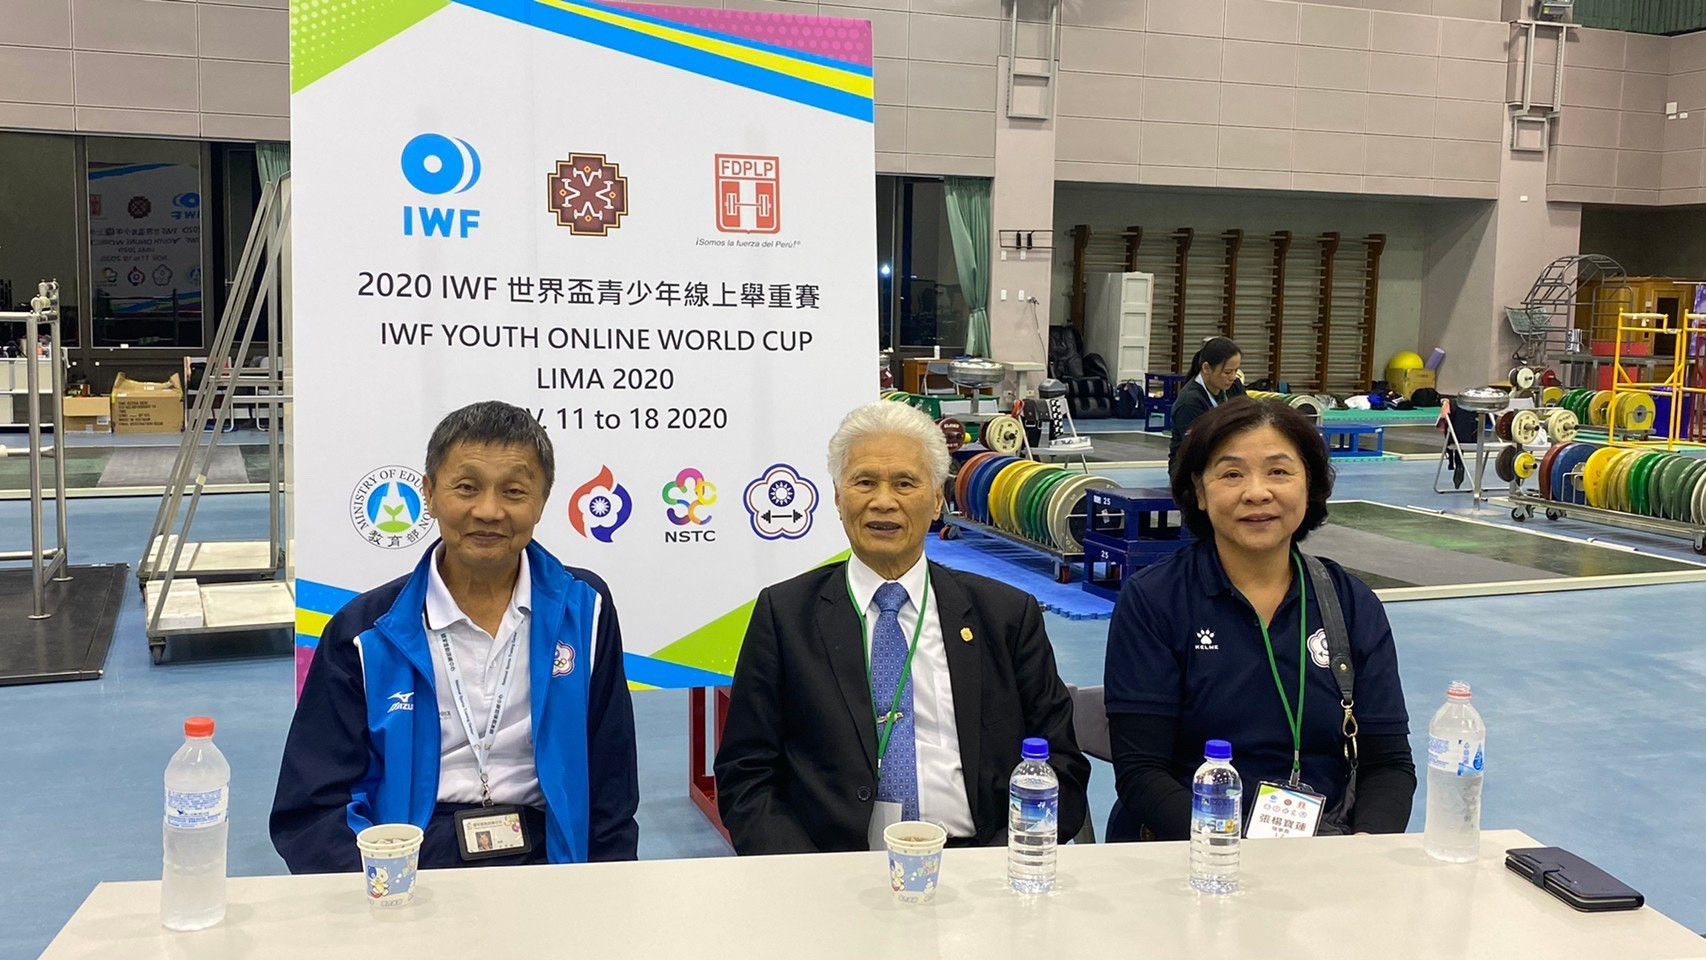 Officials in Taiwan worked through the darker hours of the night to deliver their livestream ©Chinese Taipei Weightlifting